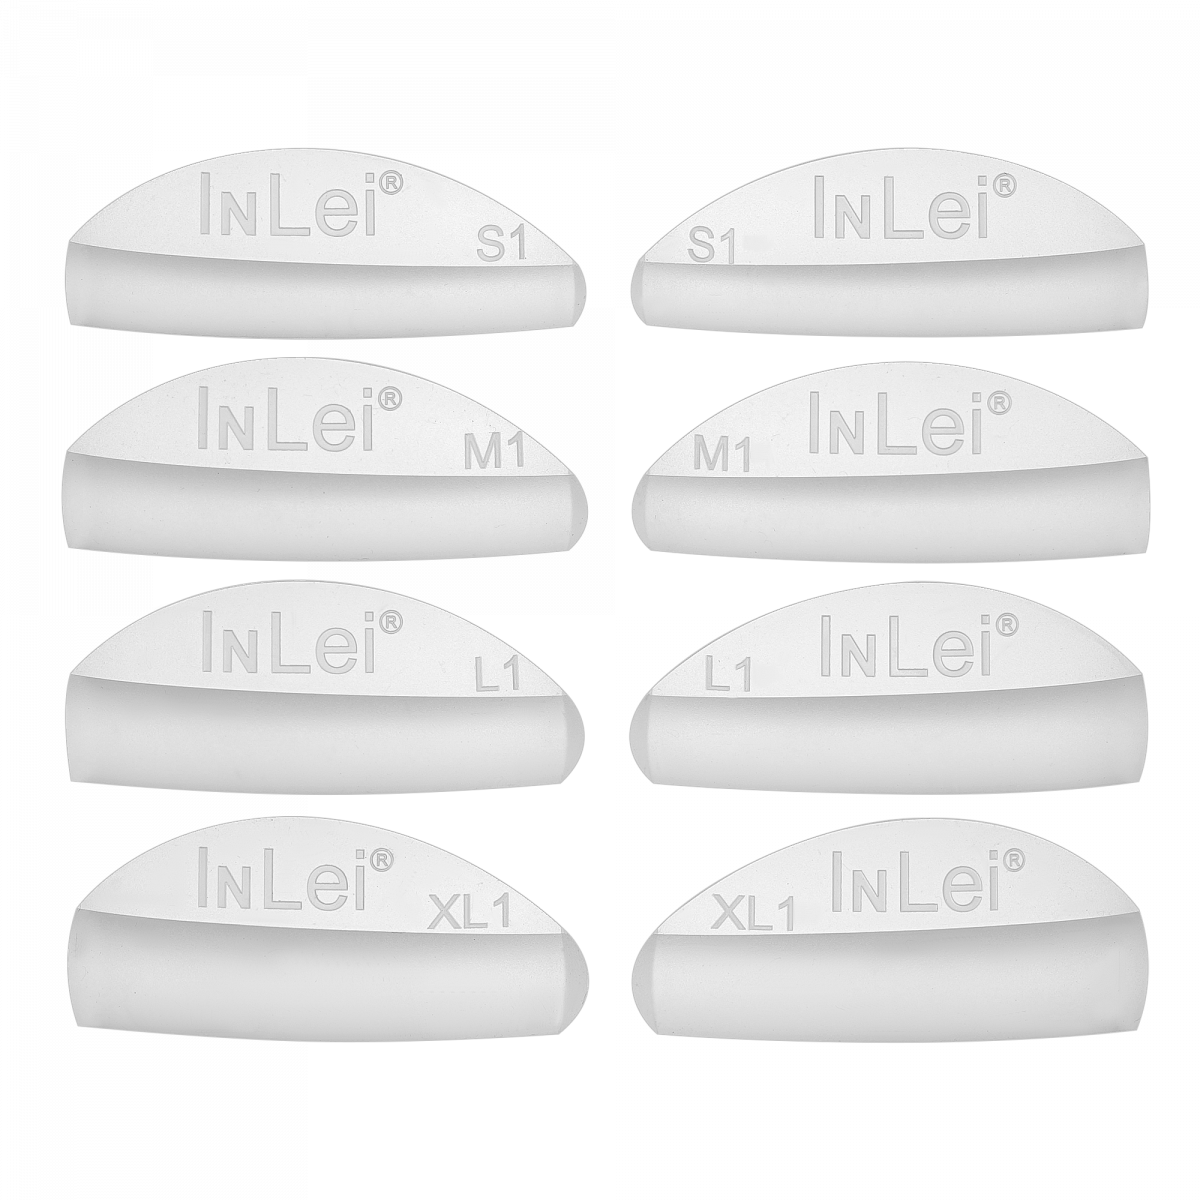 InLei - ONLY1 - Silicone Shields Mixed (4 sizes)